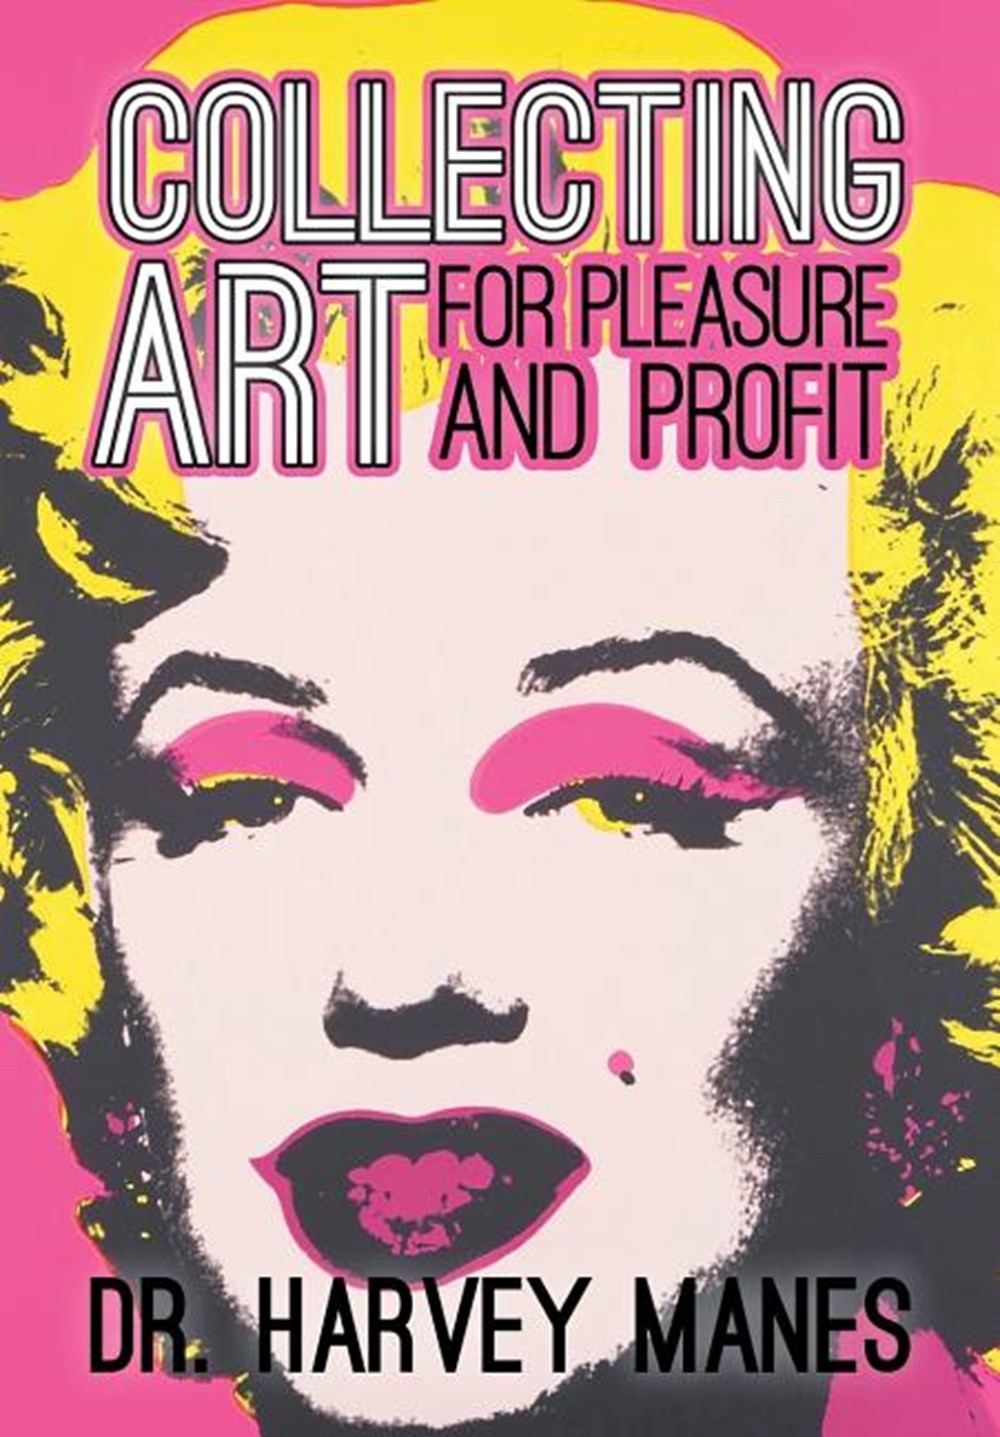 Collecting Art: For Pleasure and Profit